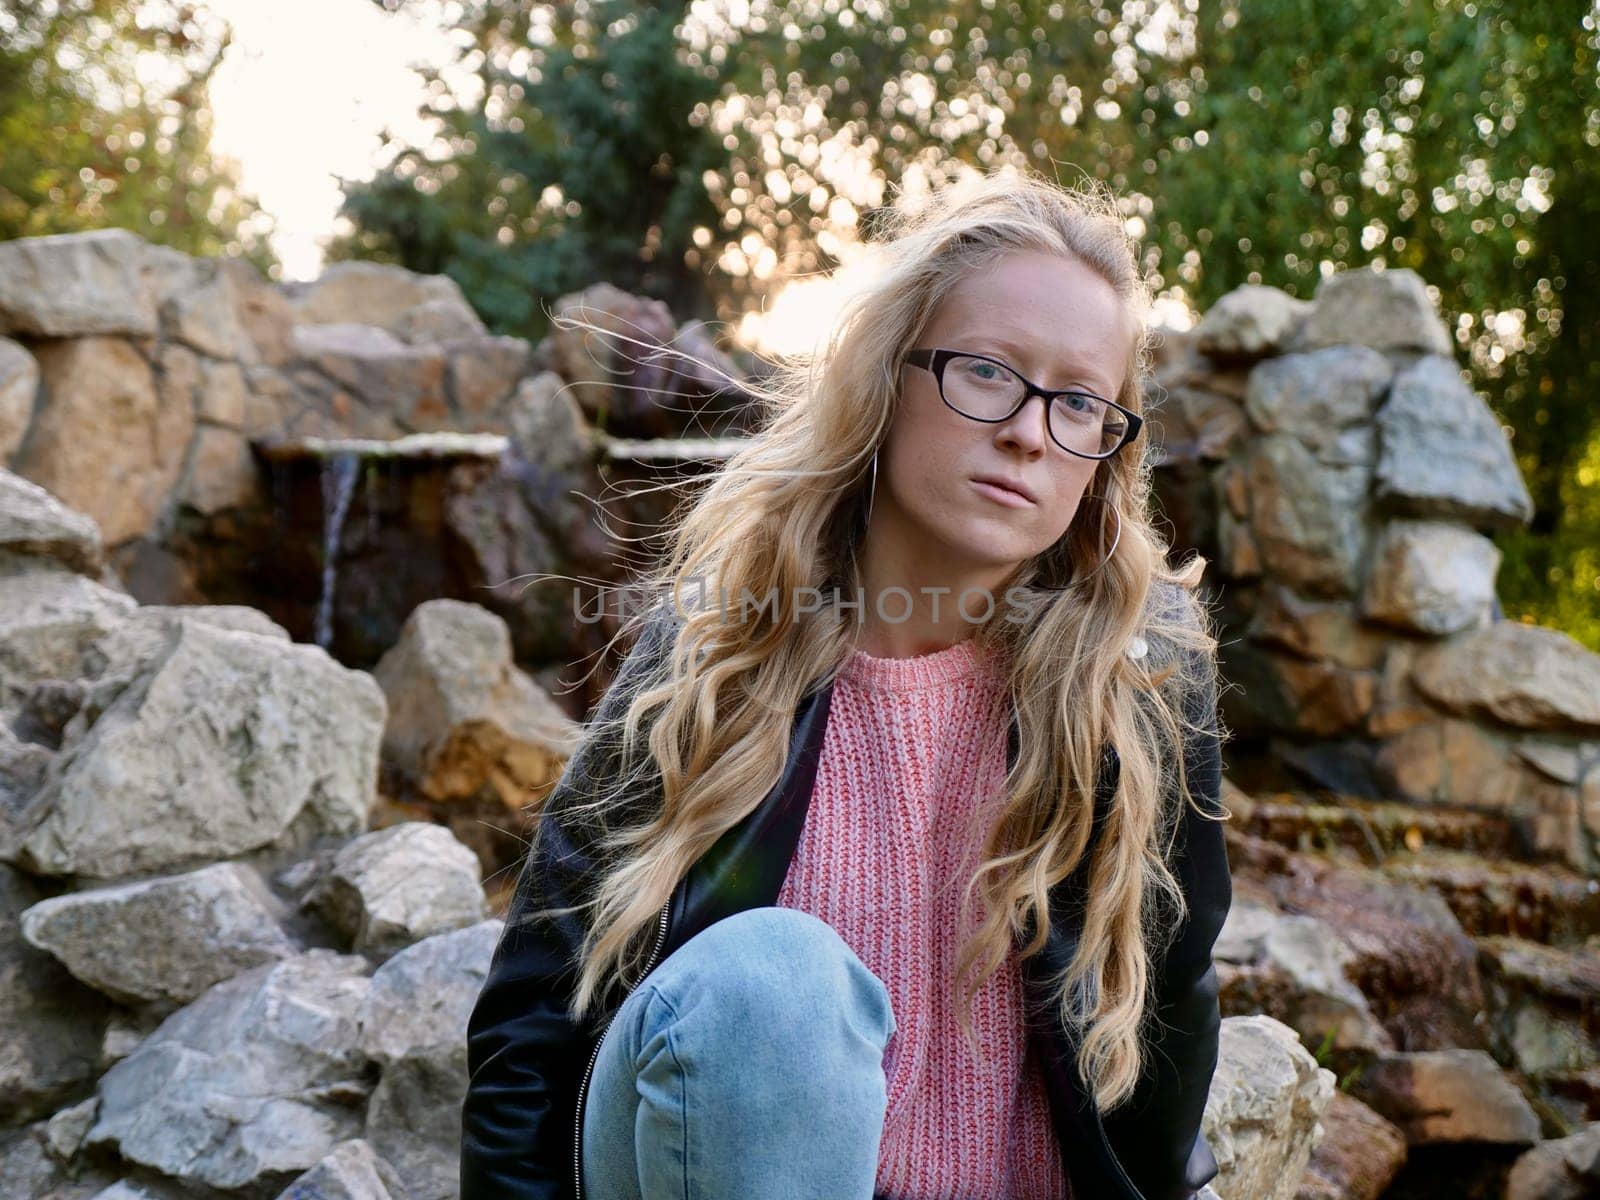 Natural Curly Blonde Woman, Albino Sitting in park on stone, Outdoors. Lack of melanin pigment in hair and skin. A person with poor eyesight wearing glasses. Close up